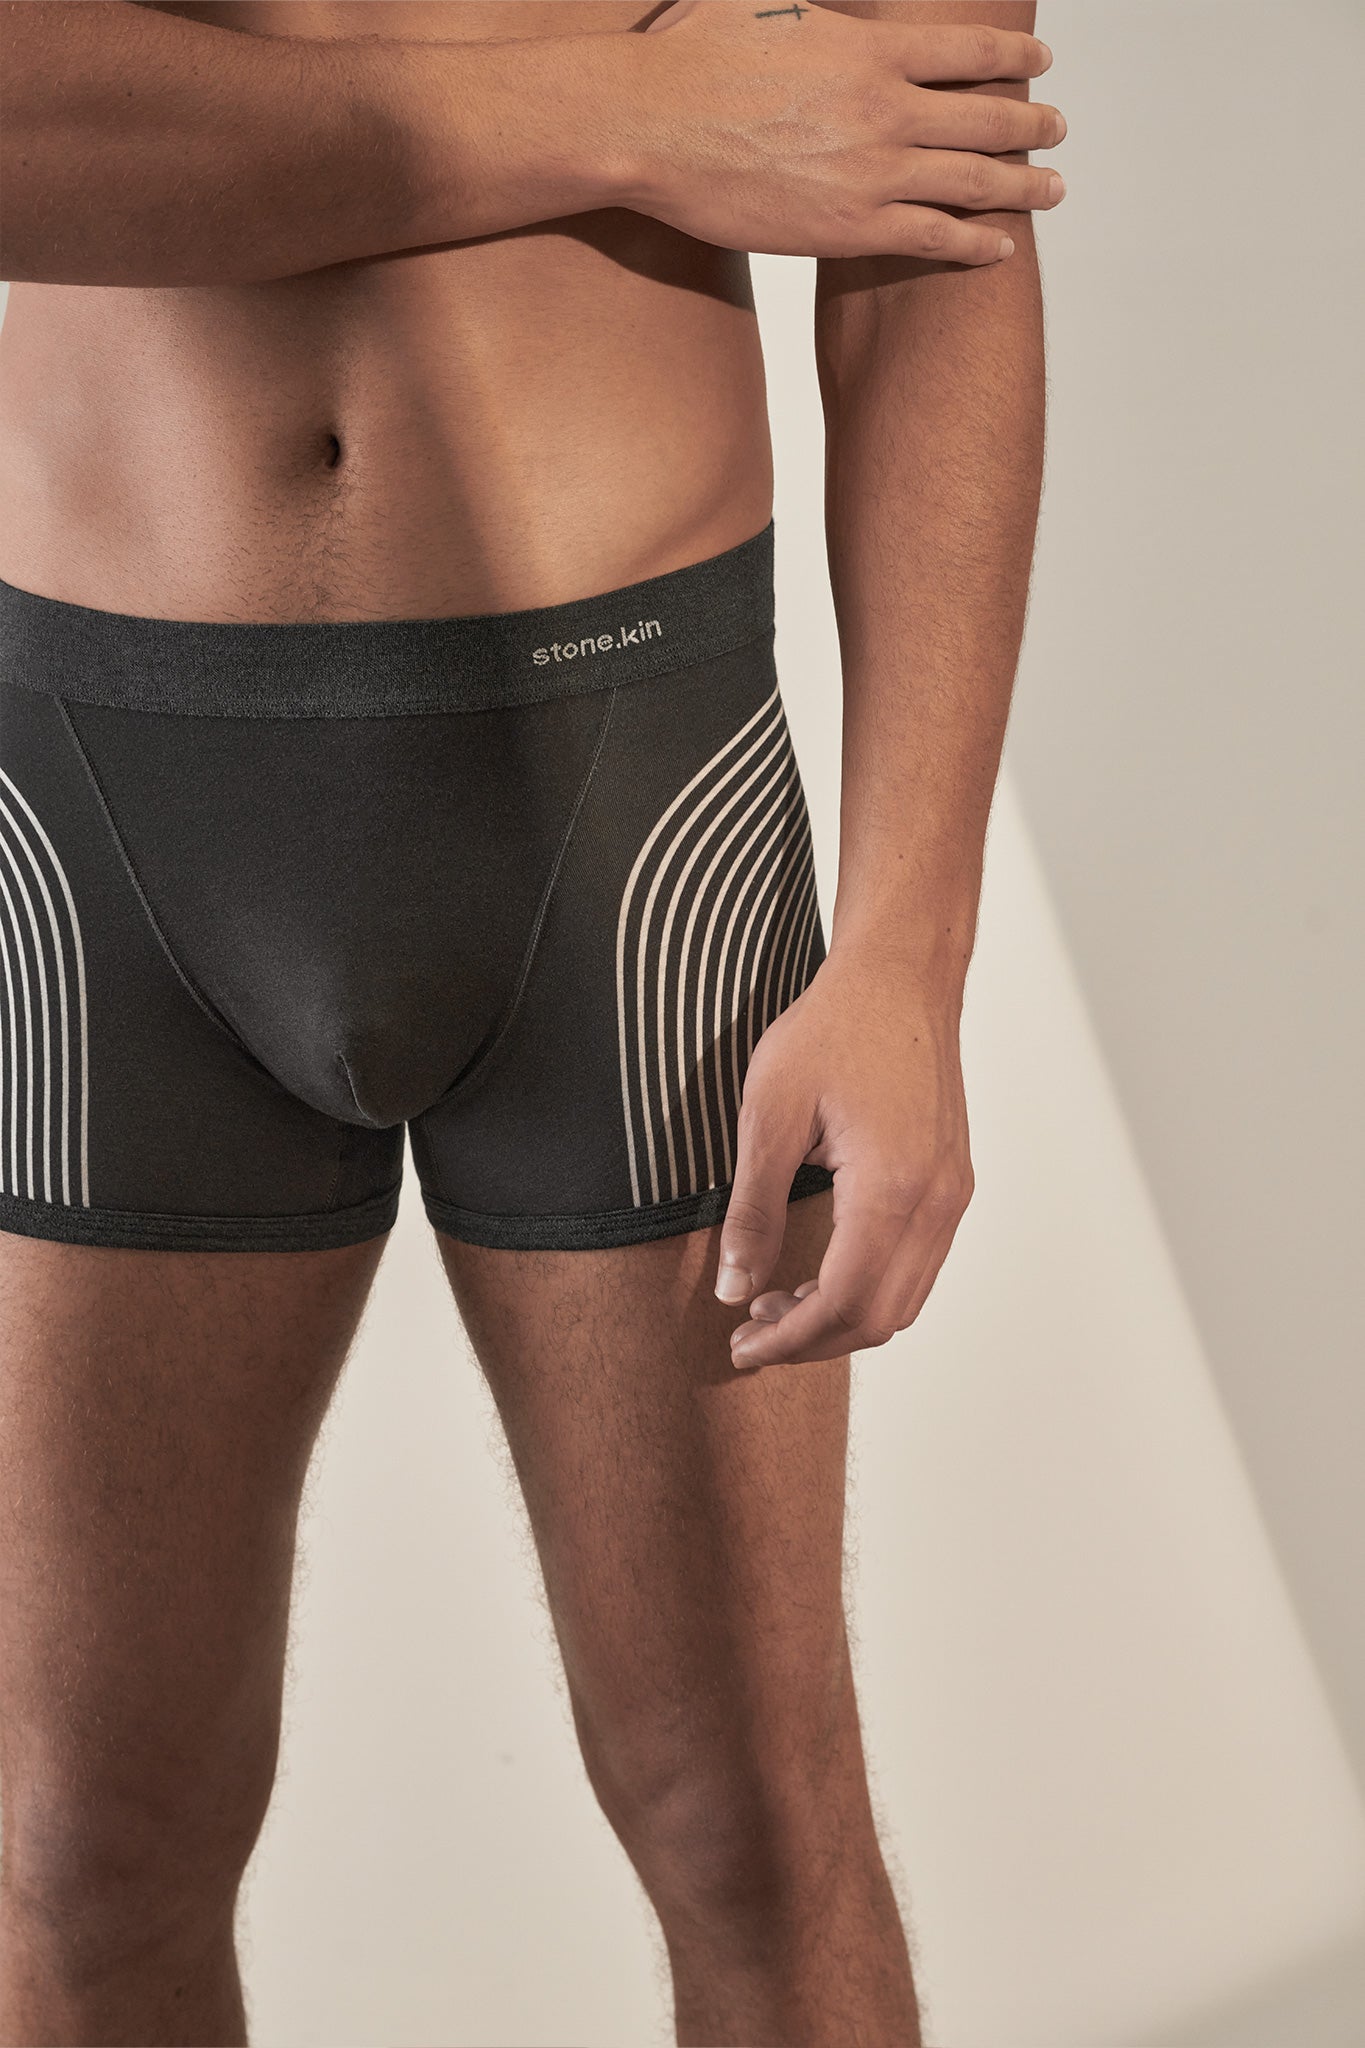 Stone.kin - Boxer Brief in Cotton Jersey - Tar with Lines